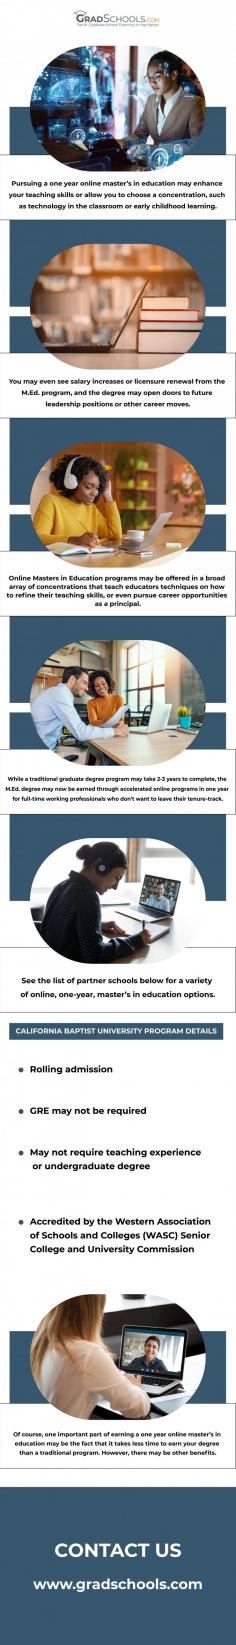 There are now one year masters program online that may be completed totally online and in half the time. However, you must be willing to make considerable changes to your schedule and lifestyle before enrolling in a fast online masters program in education As anyone who has gotten a masters, will attest, obtaining one requires persistence and dedication.
https://www.gradschools.com/degree-guide/one-year-education-masters